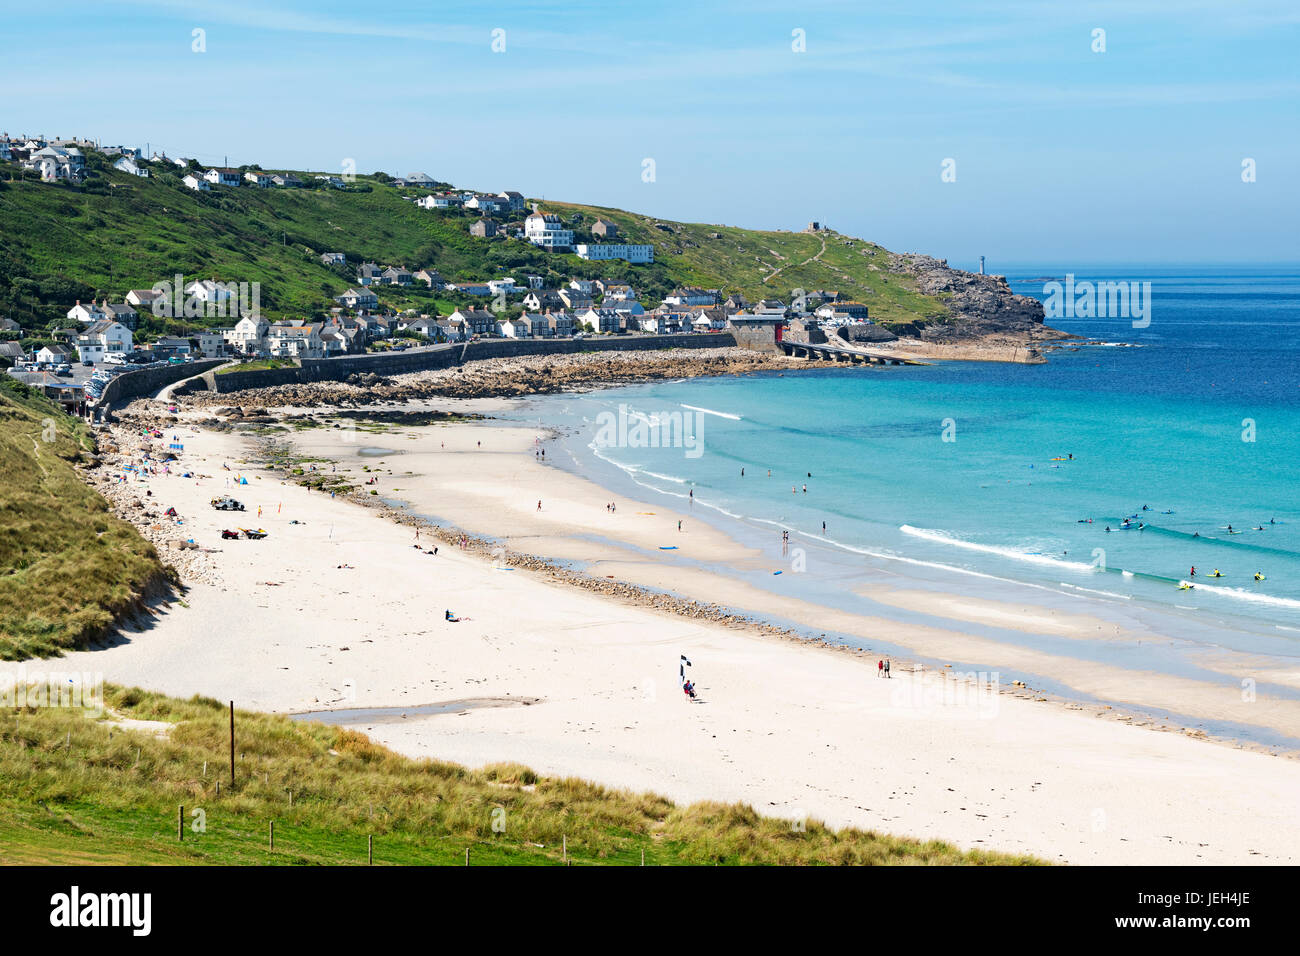 the white sandy beach and blue water at sennen cove near lands end in ...